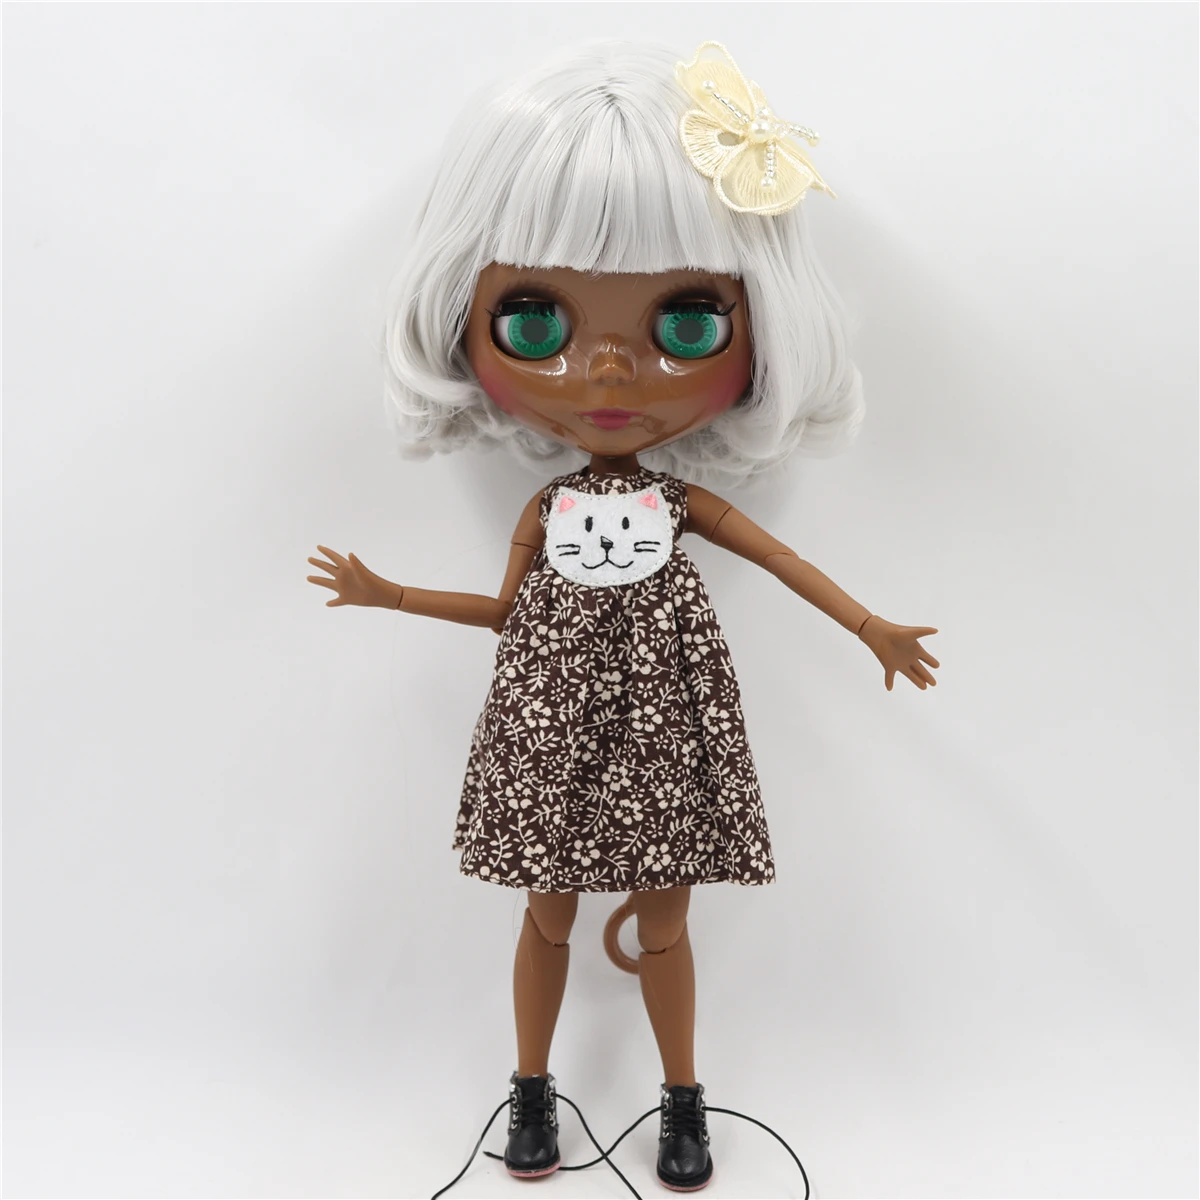 Neo Blythe Doll with Grey Hair, Black skin, Shiny Face & Jointed Body 1